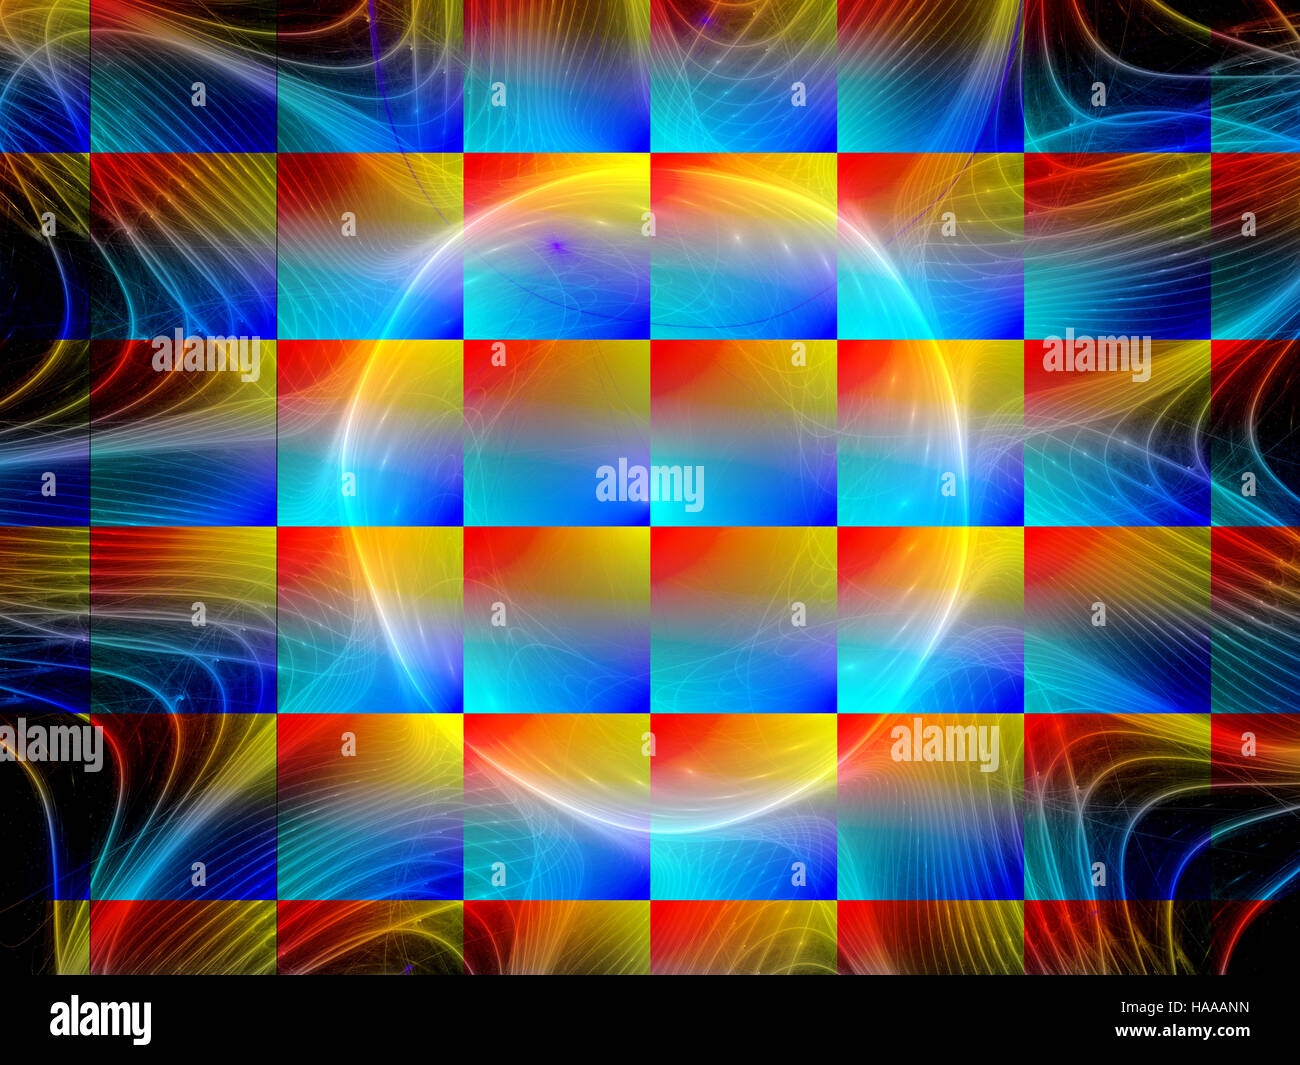 Tetrachromatic imaginative background, tetrachromacy, computer generated abstract background, 3D rendering Stock Photo